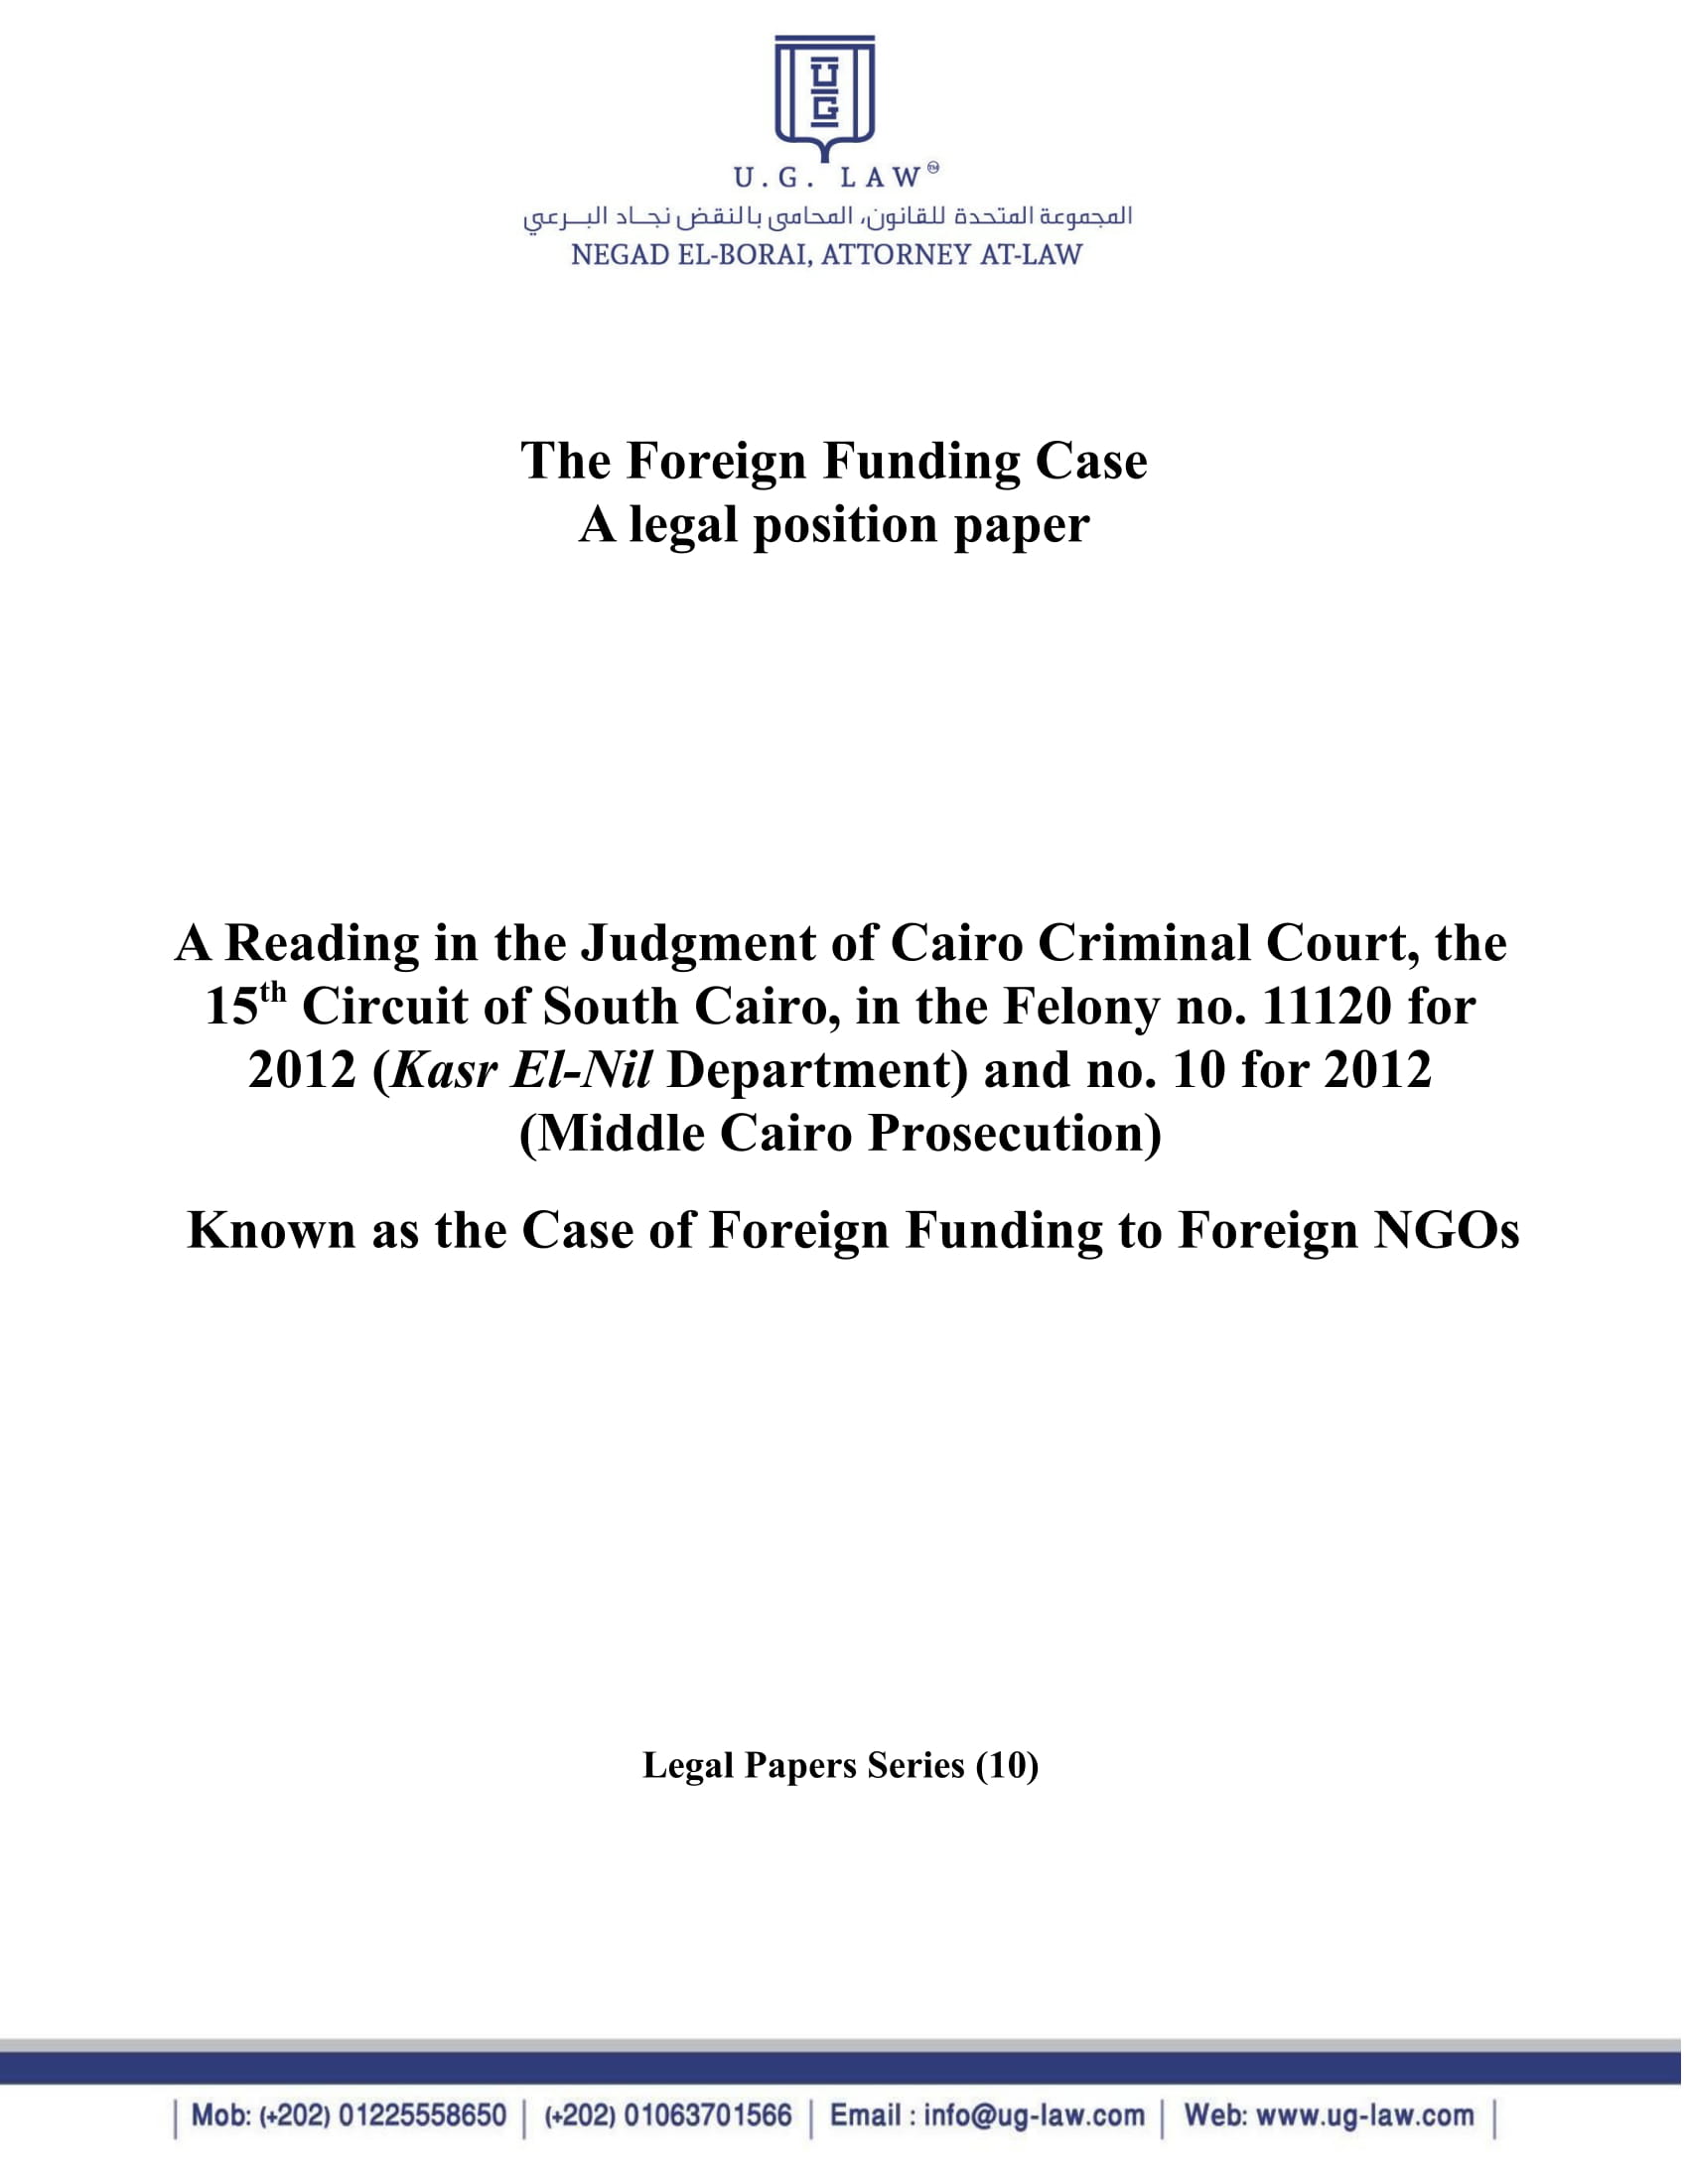 A legal position paper: The Foreign Funding Case